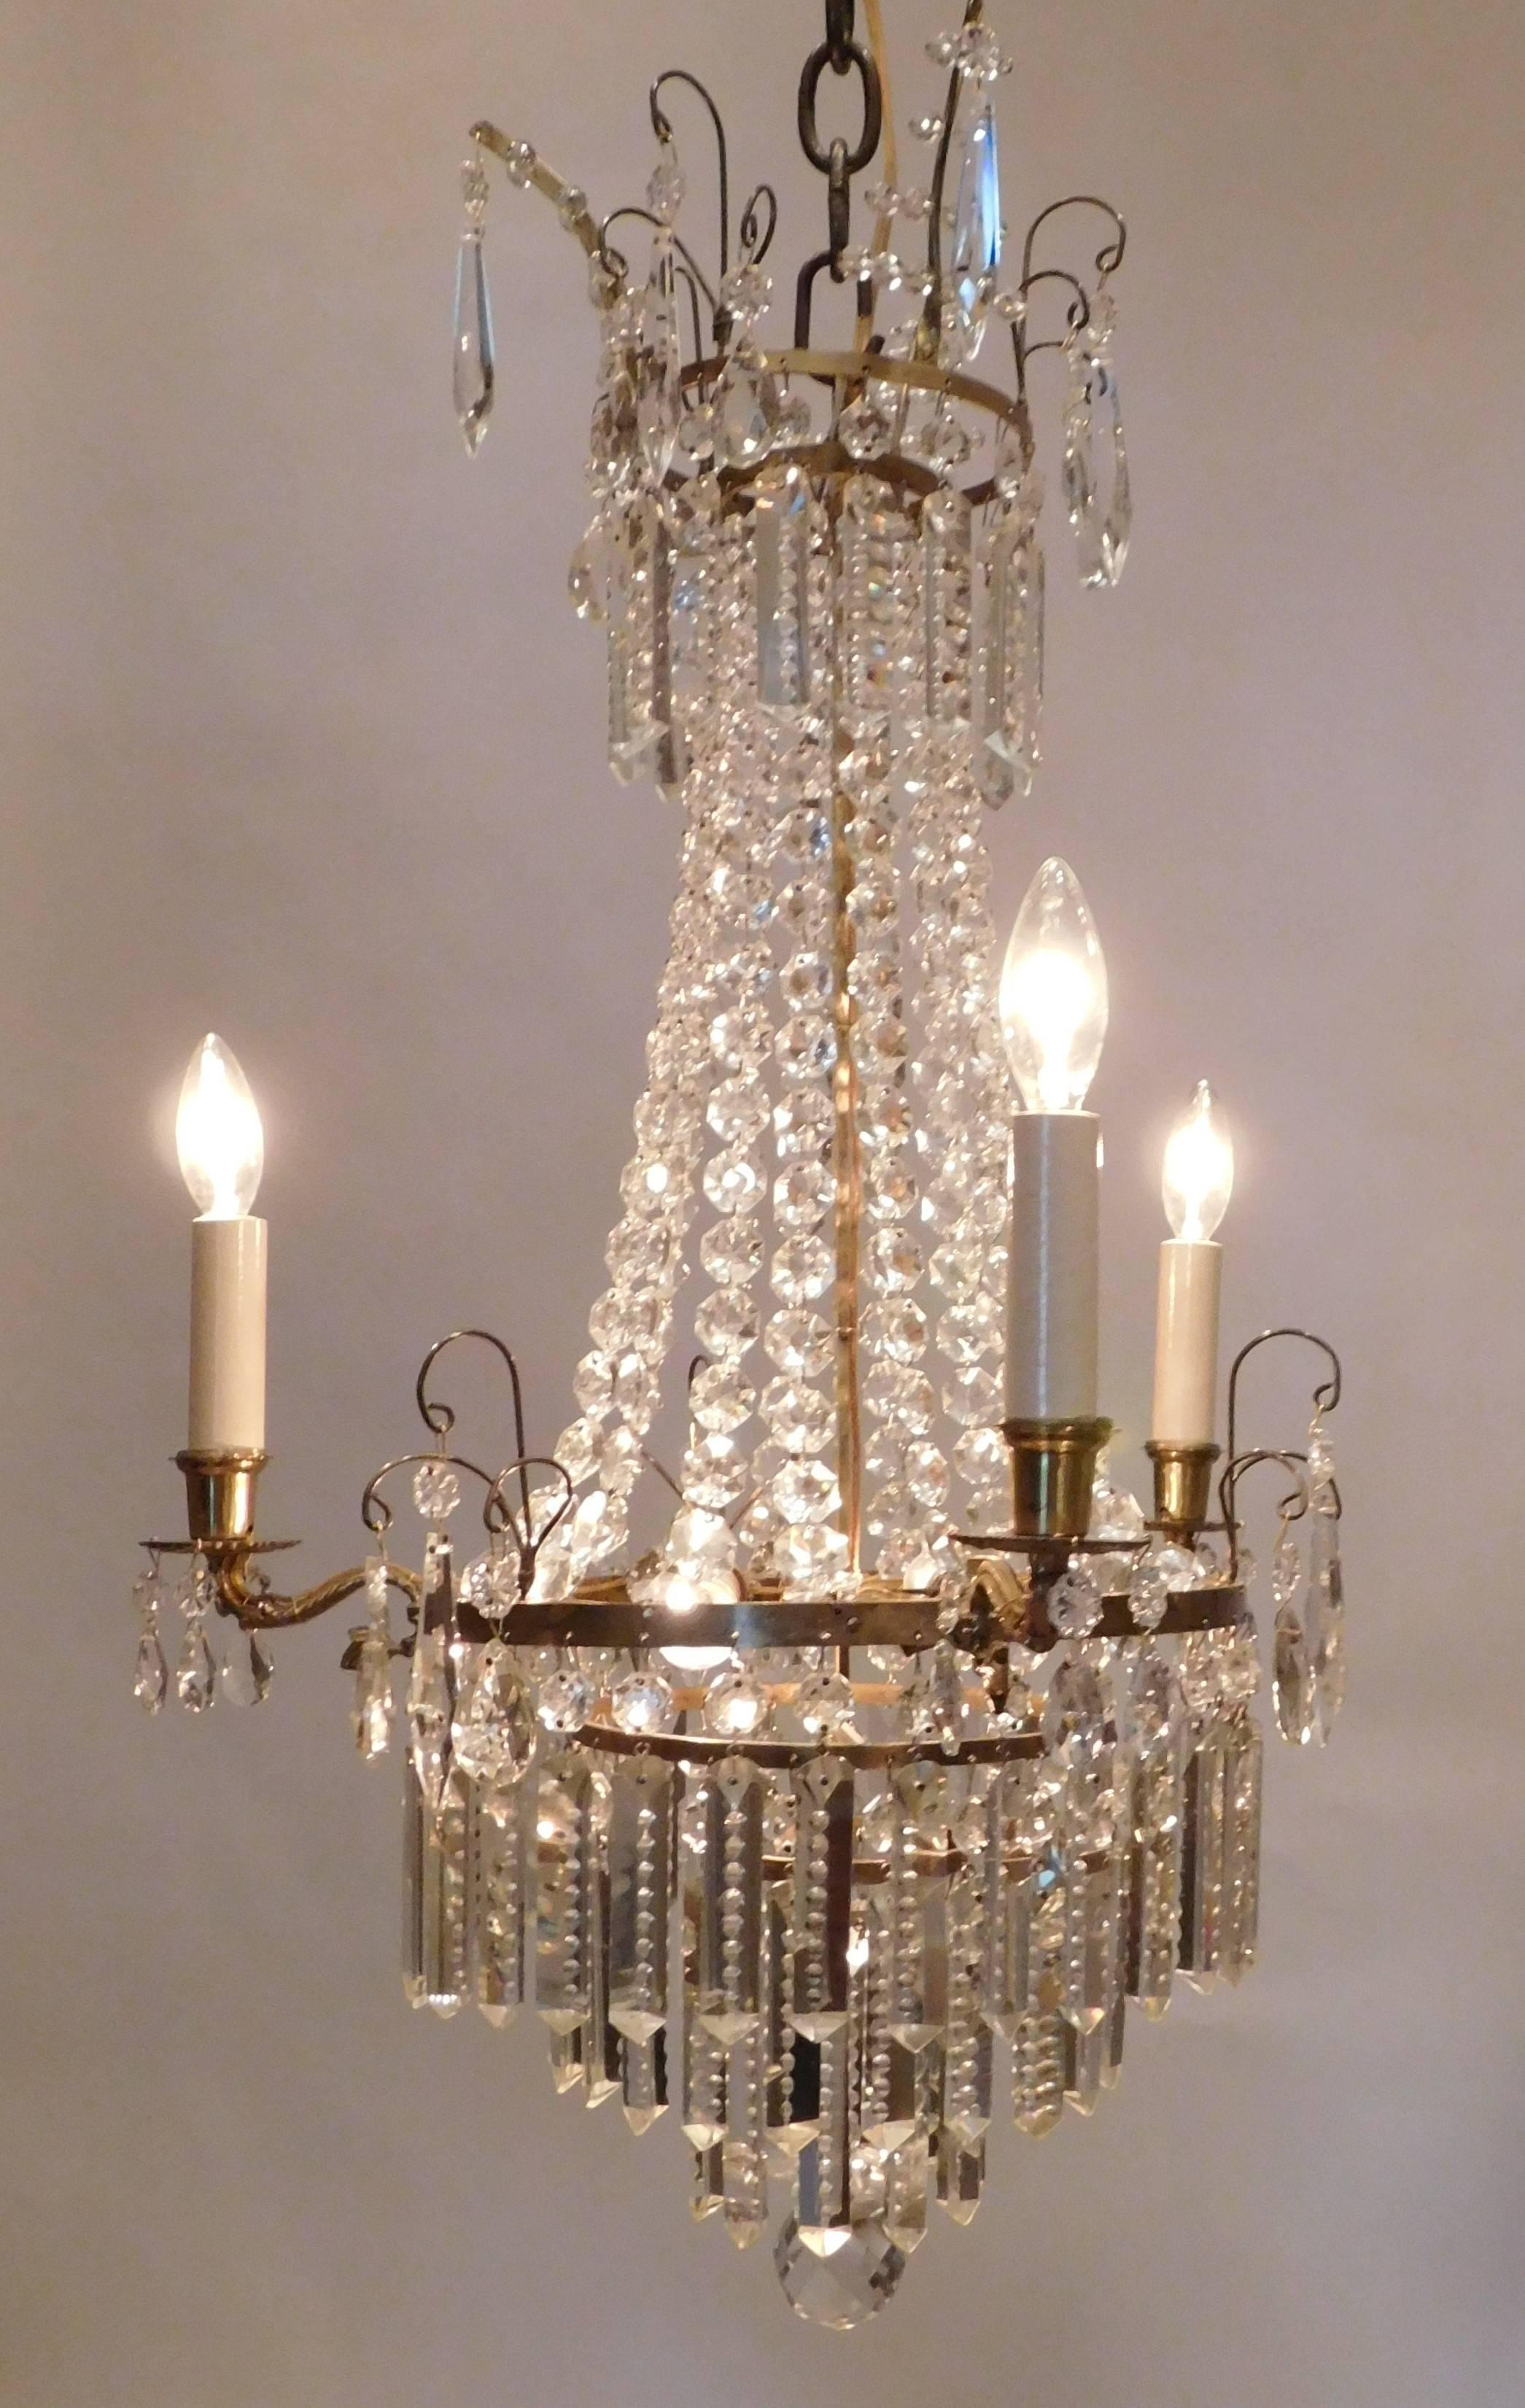 Five-light tent and cascade form - three lights on the outside and two on the inside - beautiful notch-cut prisms around base and crown. Chain, hanging hardware and ceiling cap included.